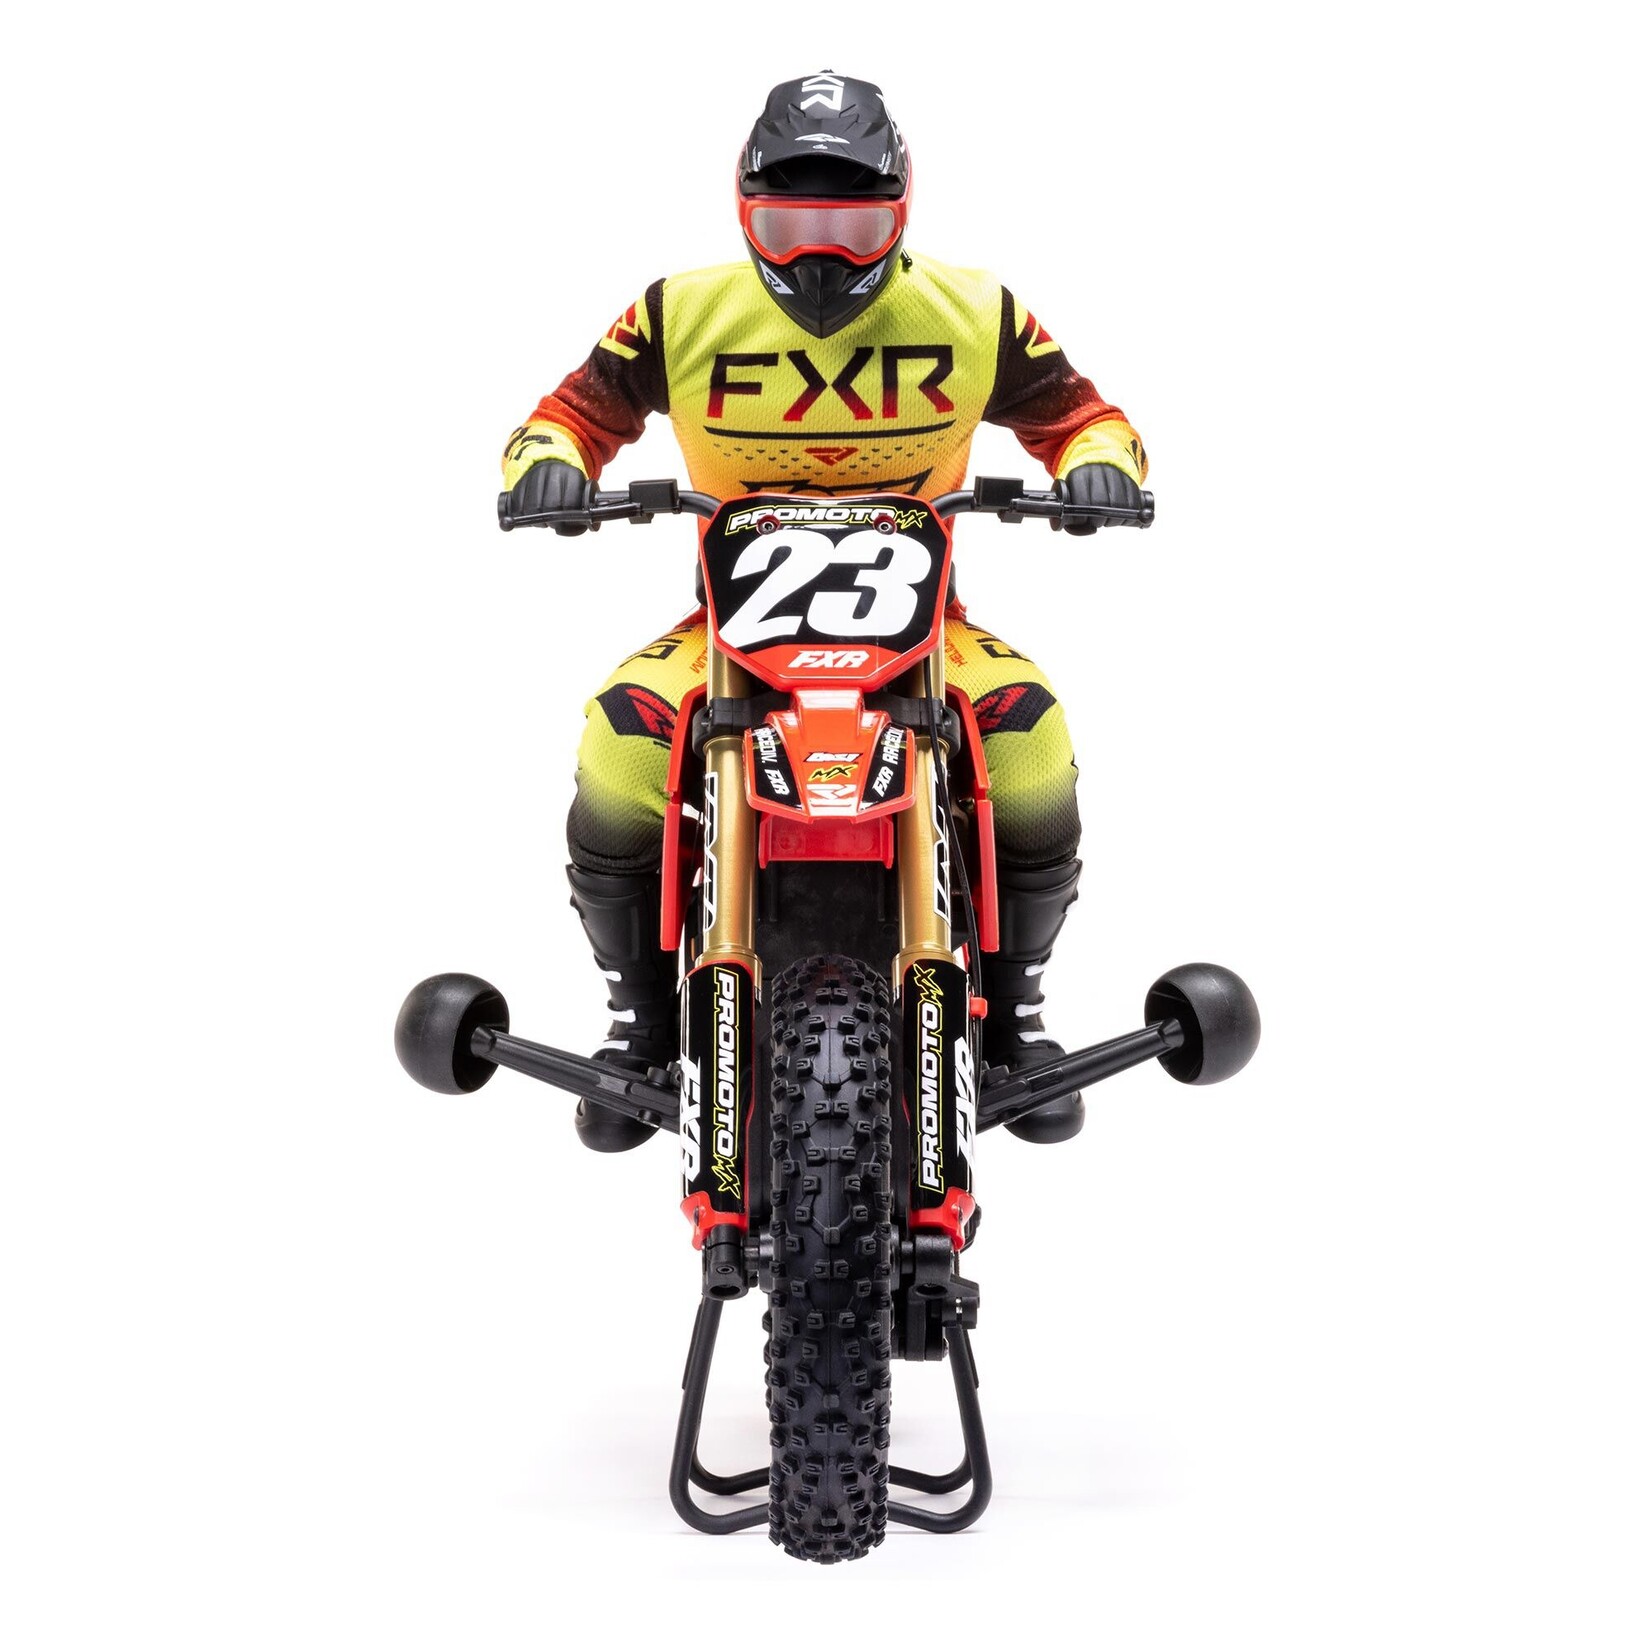 Losi 1/4 Promoto-MX Motorcycle RTR, FXR (Red)